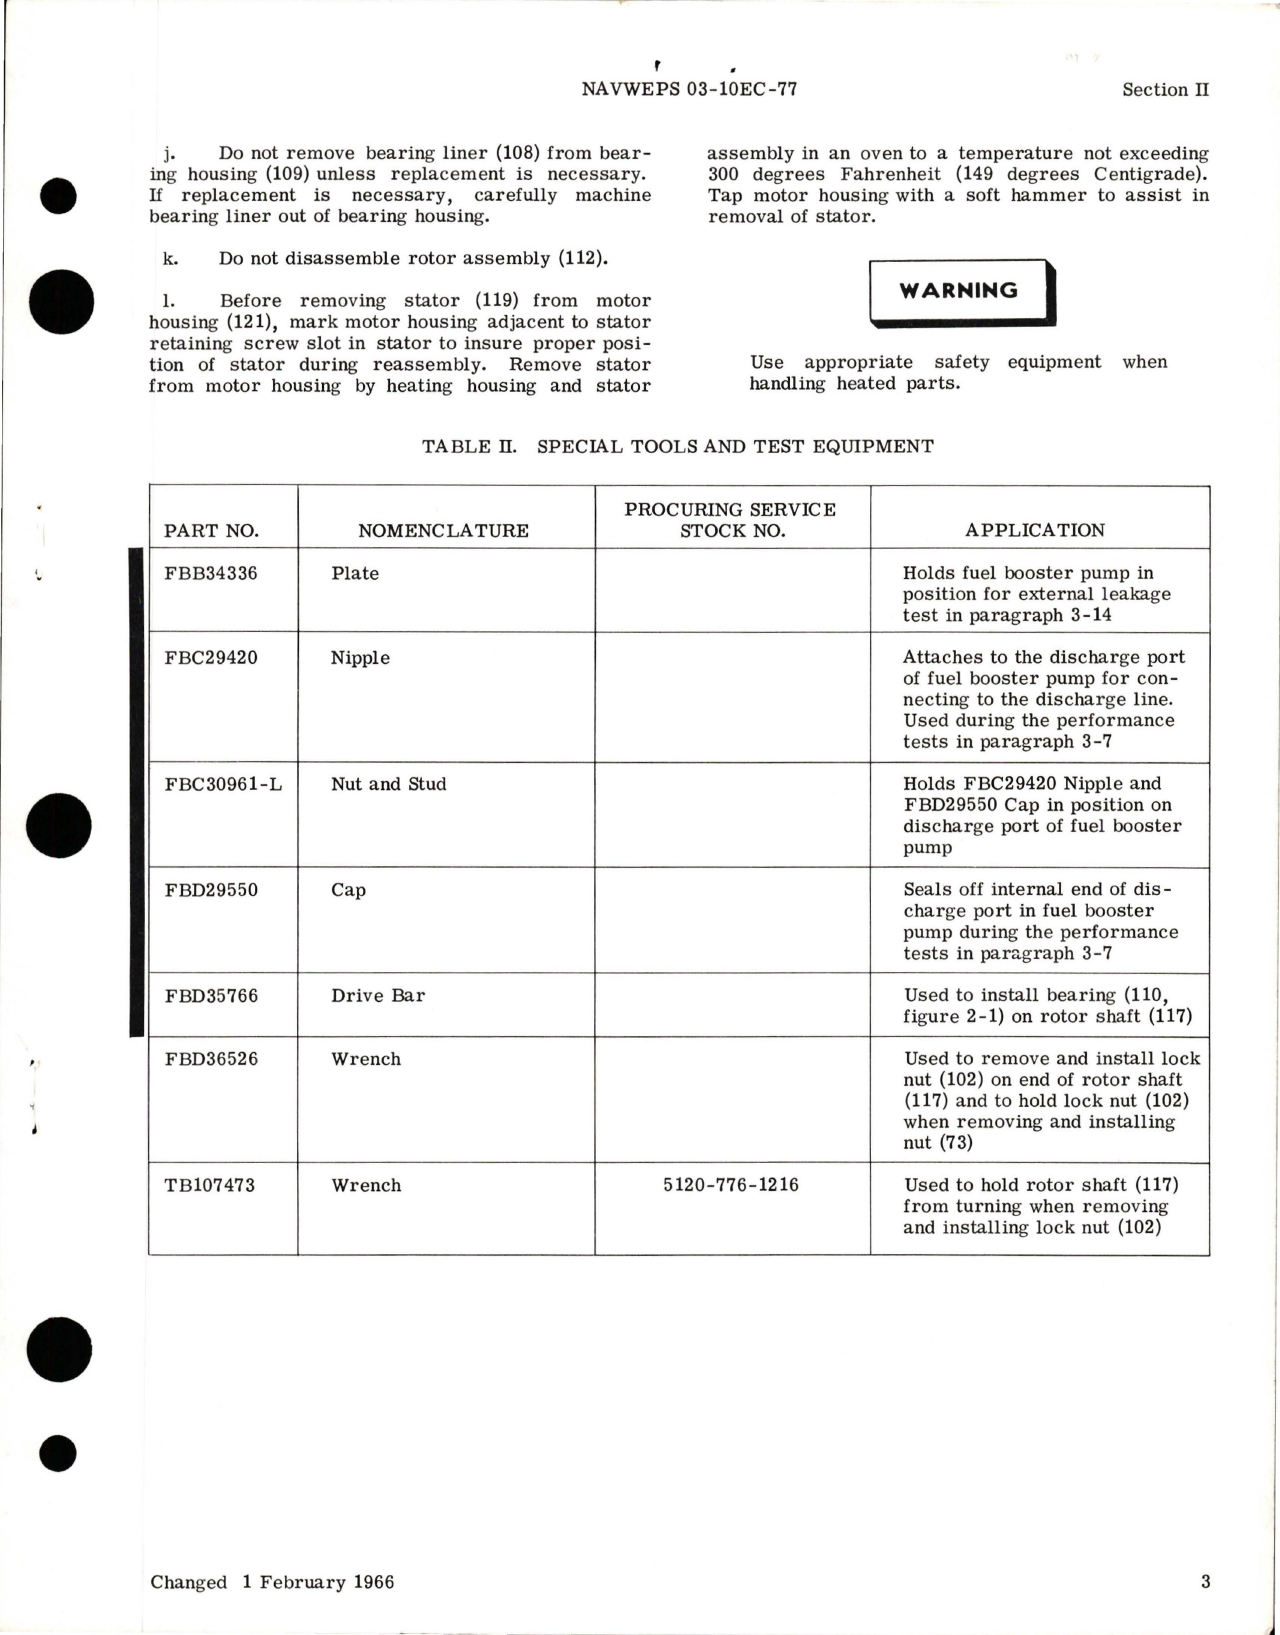 Sample page 5 from AirCorps Library document: Overhaul Instructions for Fuel Booster Pump - Models TB131300-3 and 238900-1